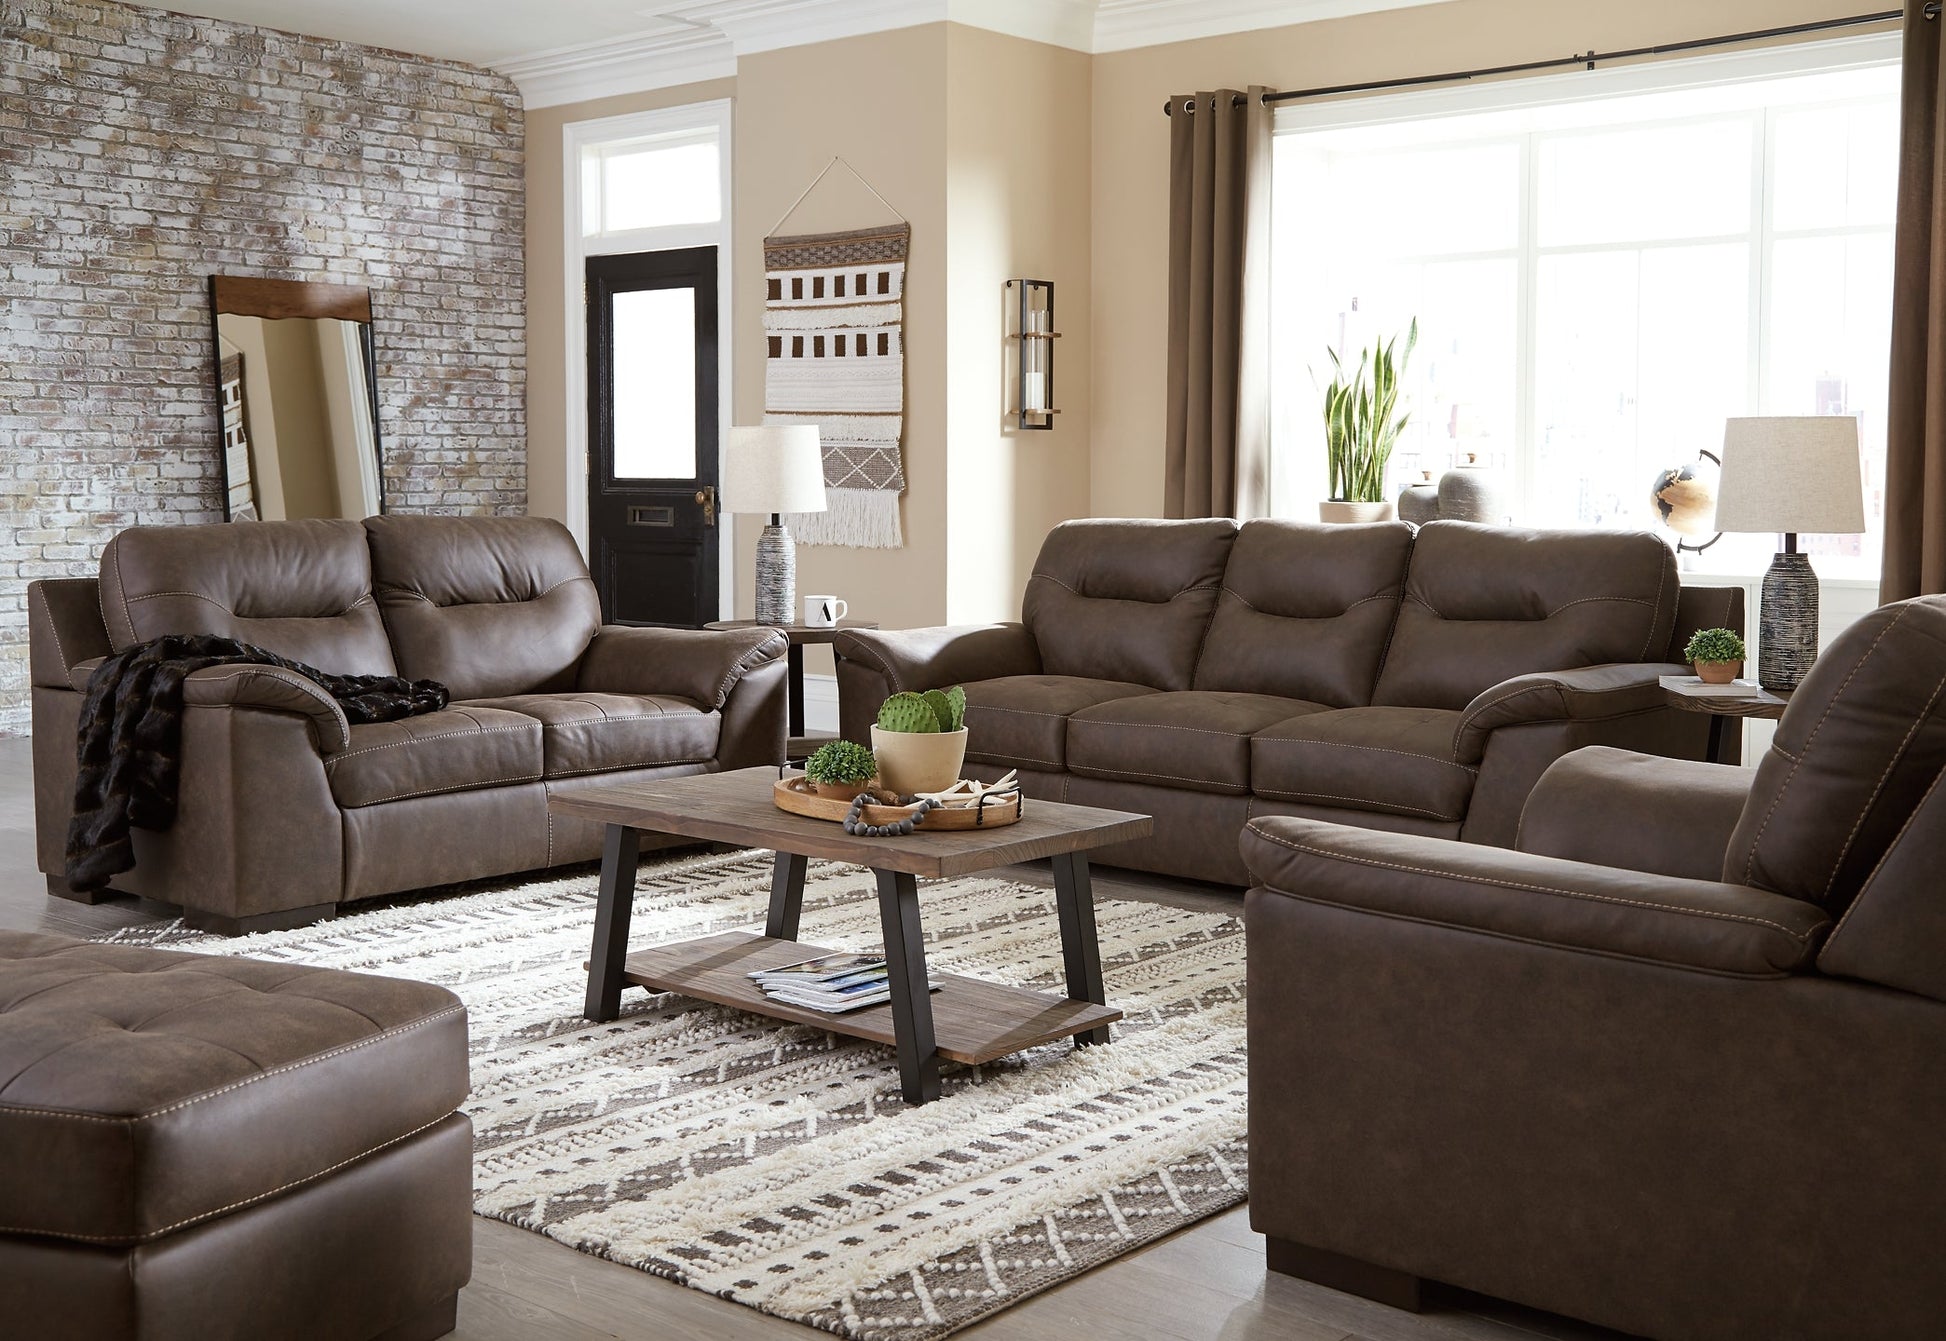 Maderla Sofa, Loveseat, Chair and Ottoman at Walker Mattress and Furniture Locations in Cedar Park and Belton TX.